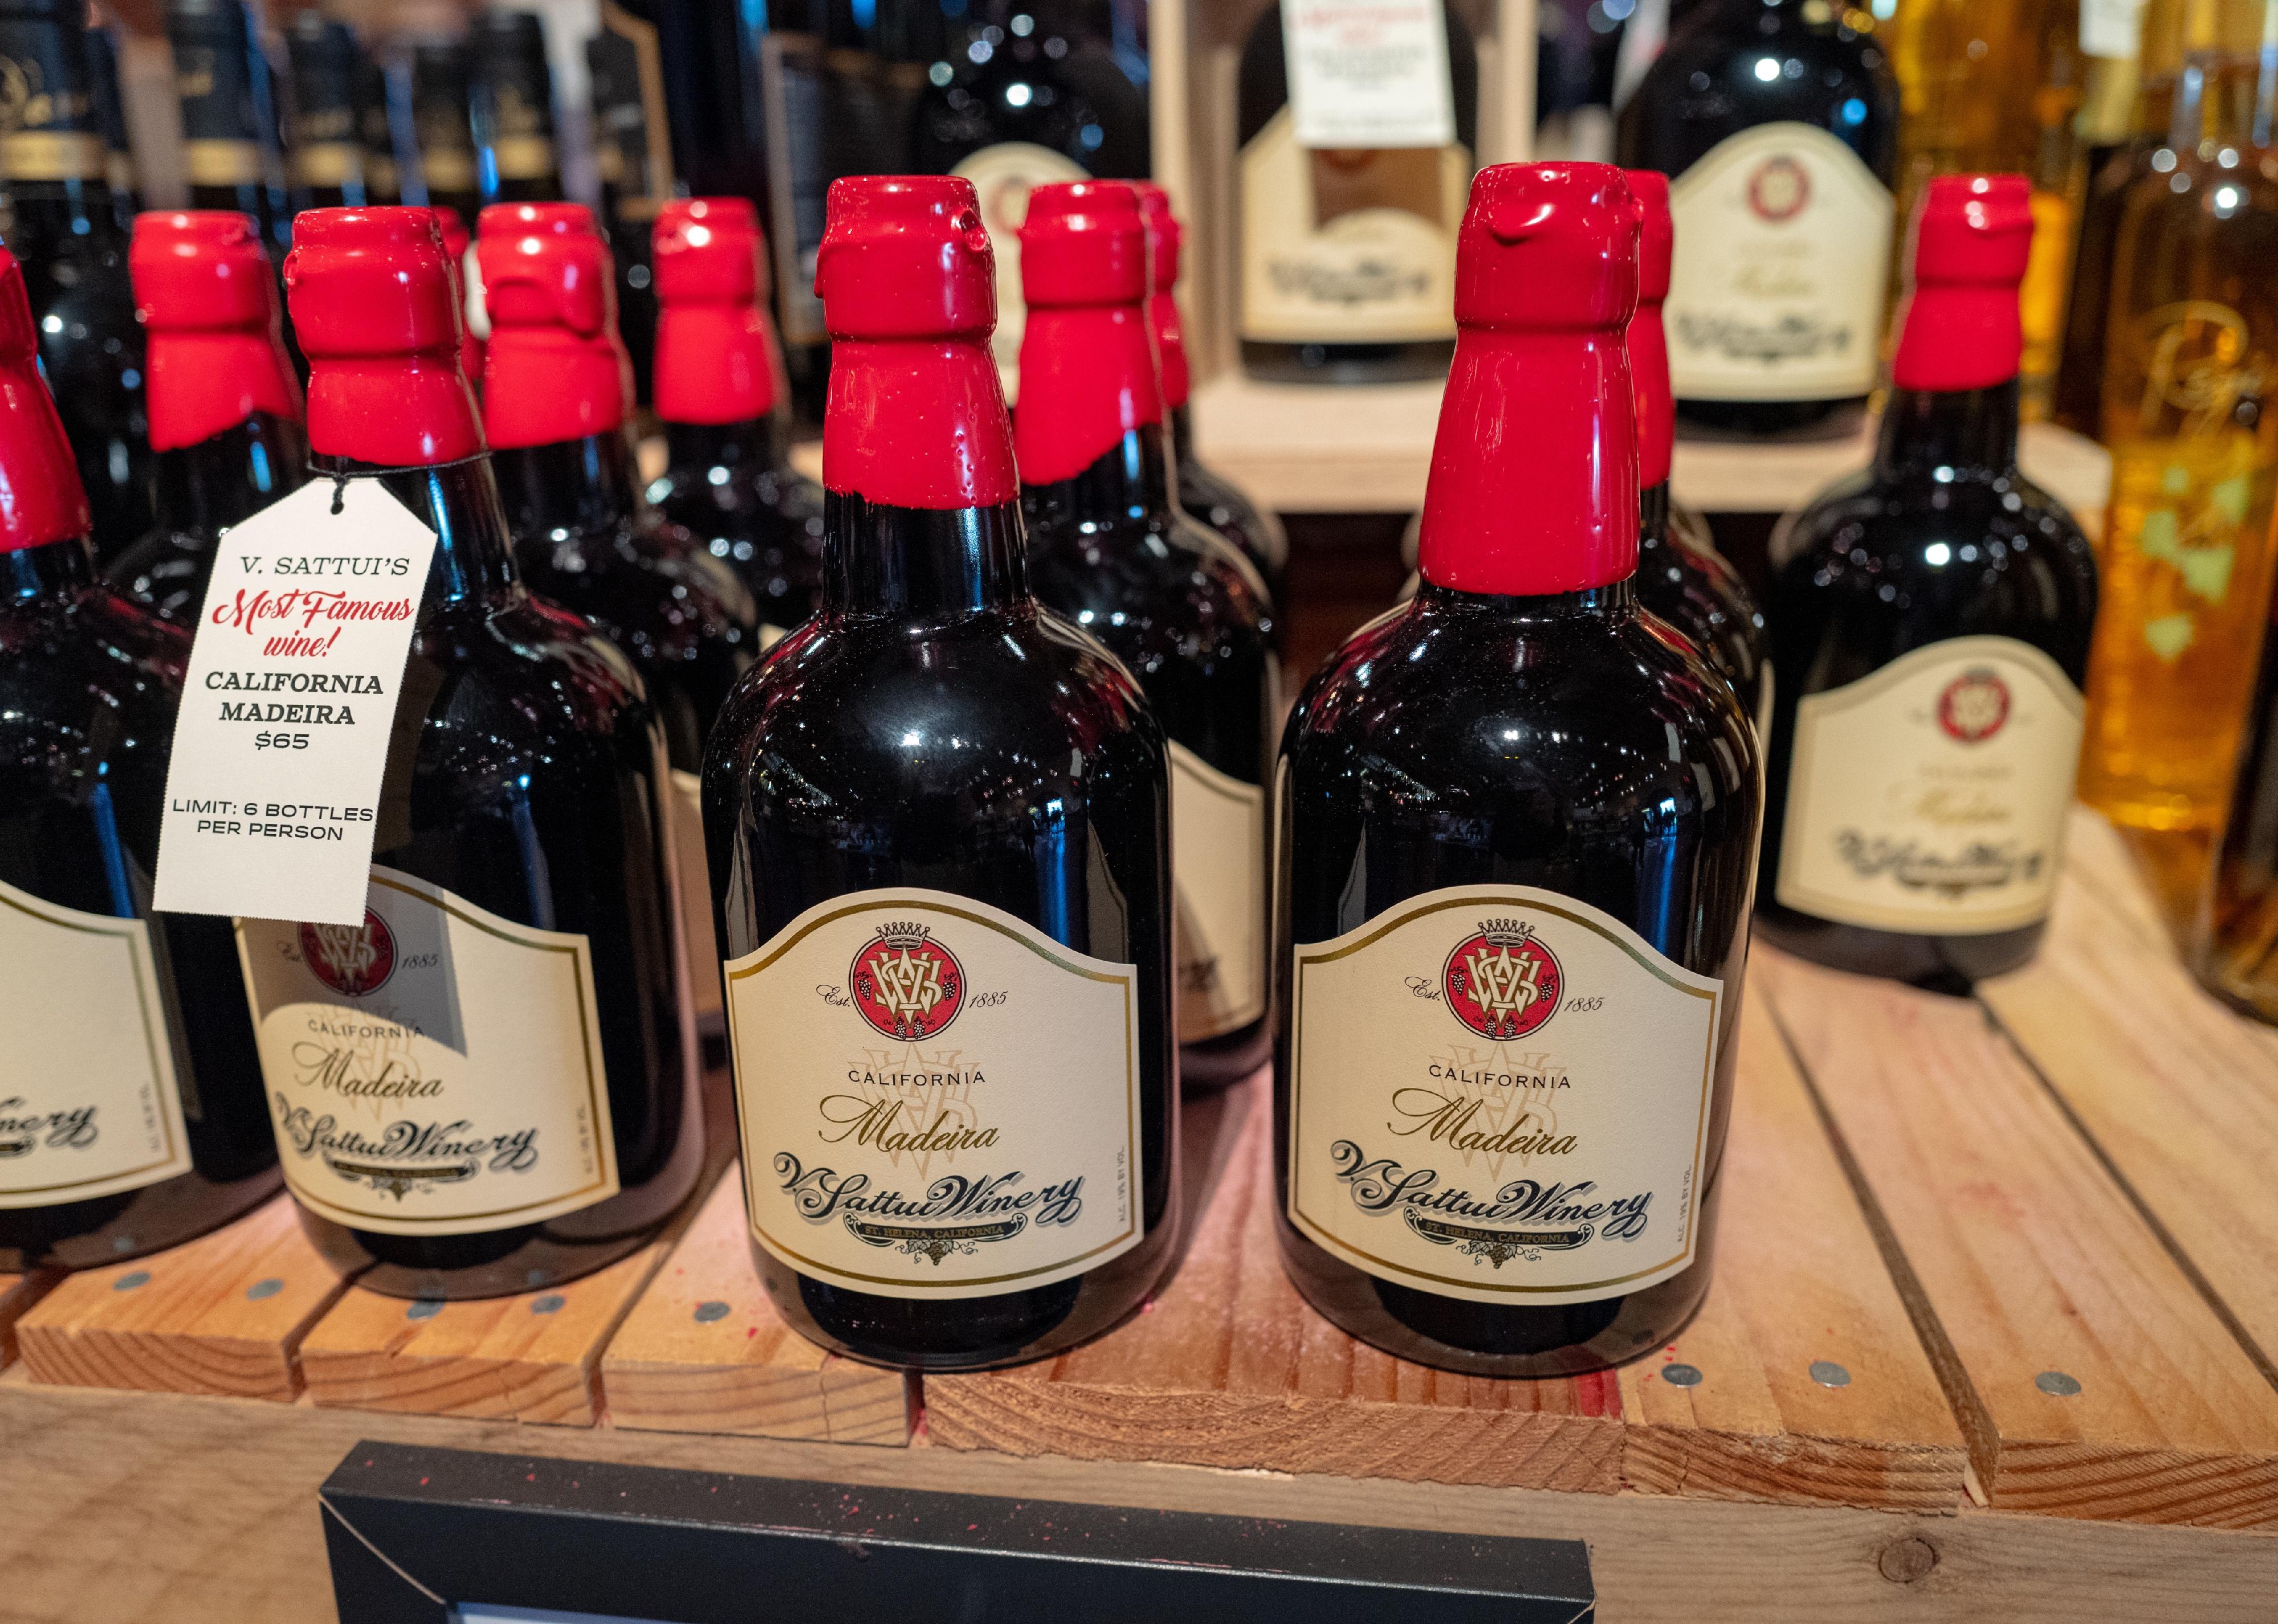 Close up shot of collection of California Madeira wine bottles with red wax tops.